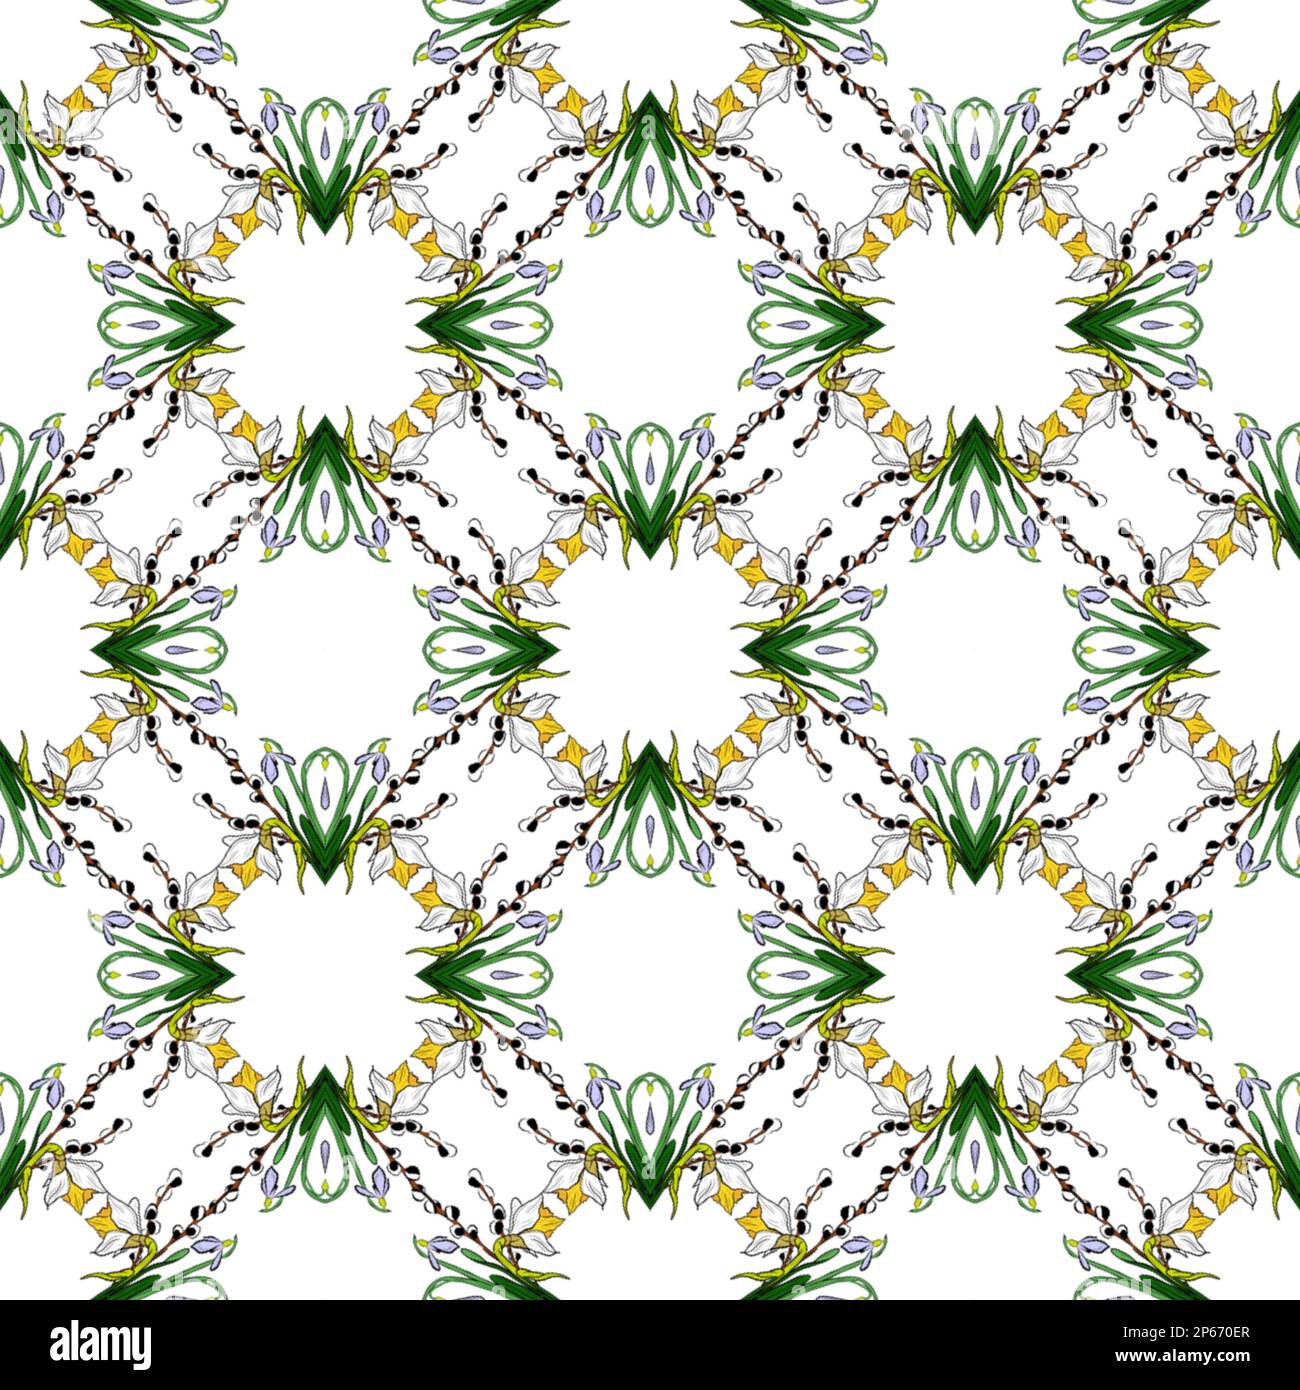 drawing seamless pattern spring flowers for home textiles, towels, tacks, aprons. It can also be used for vintage-style invitations, scrapbooking, wra Stock Photo